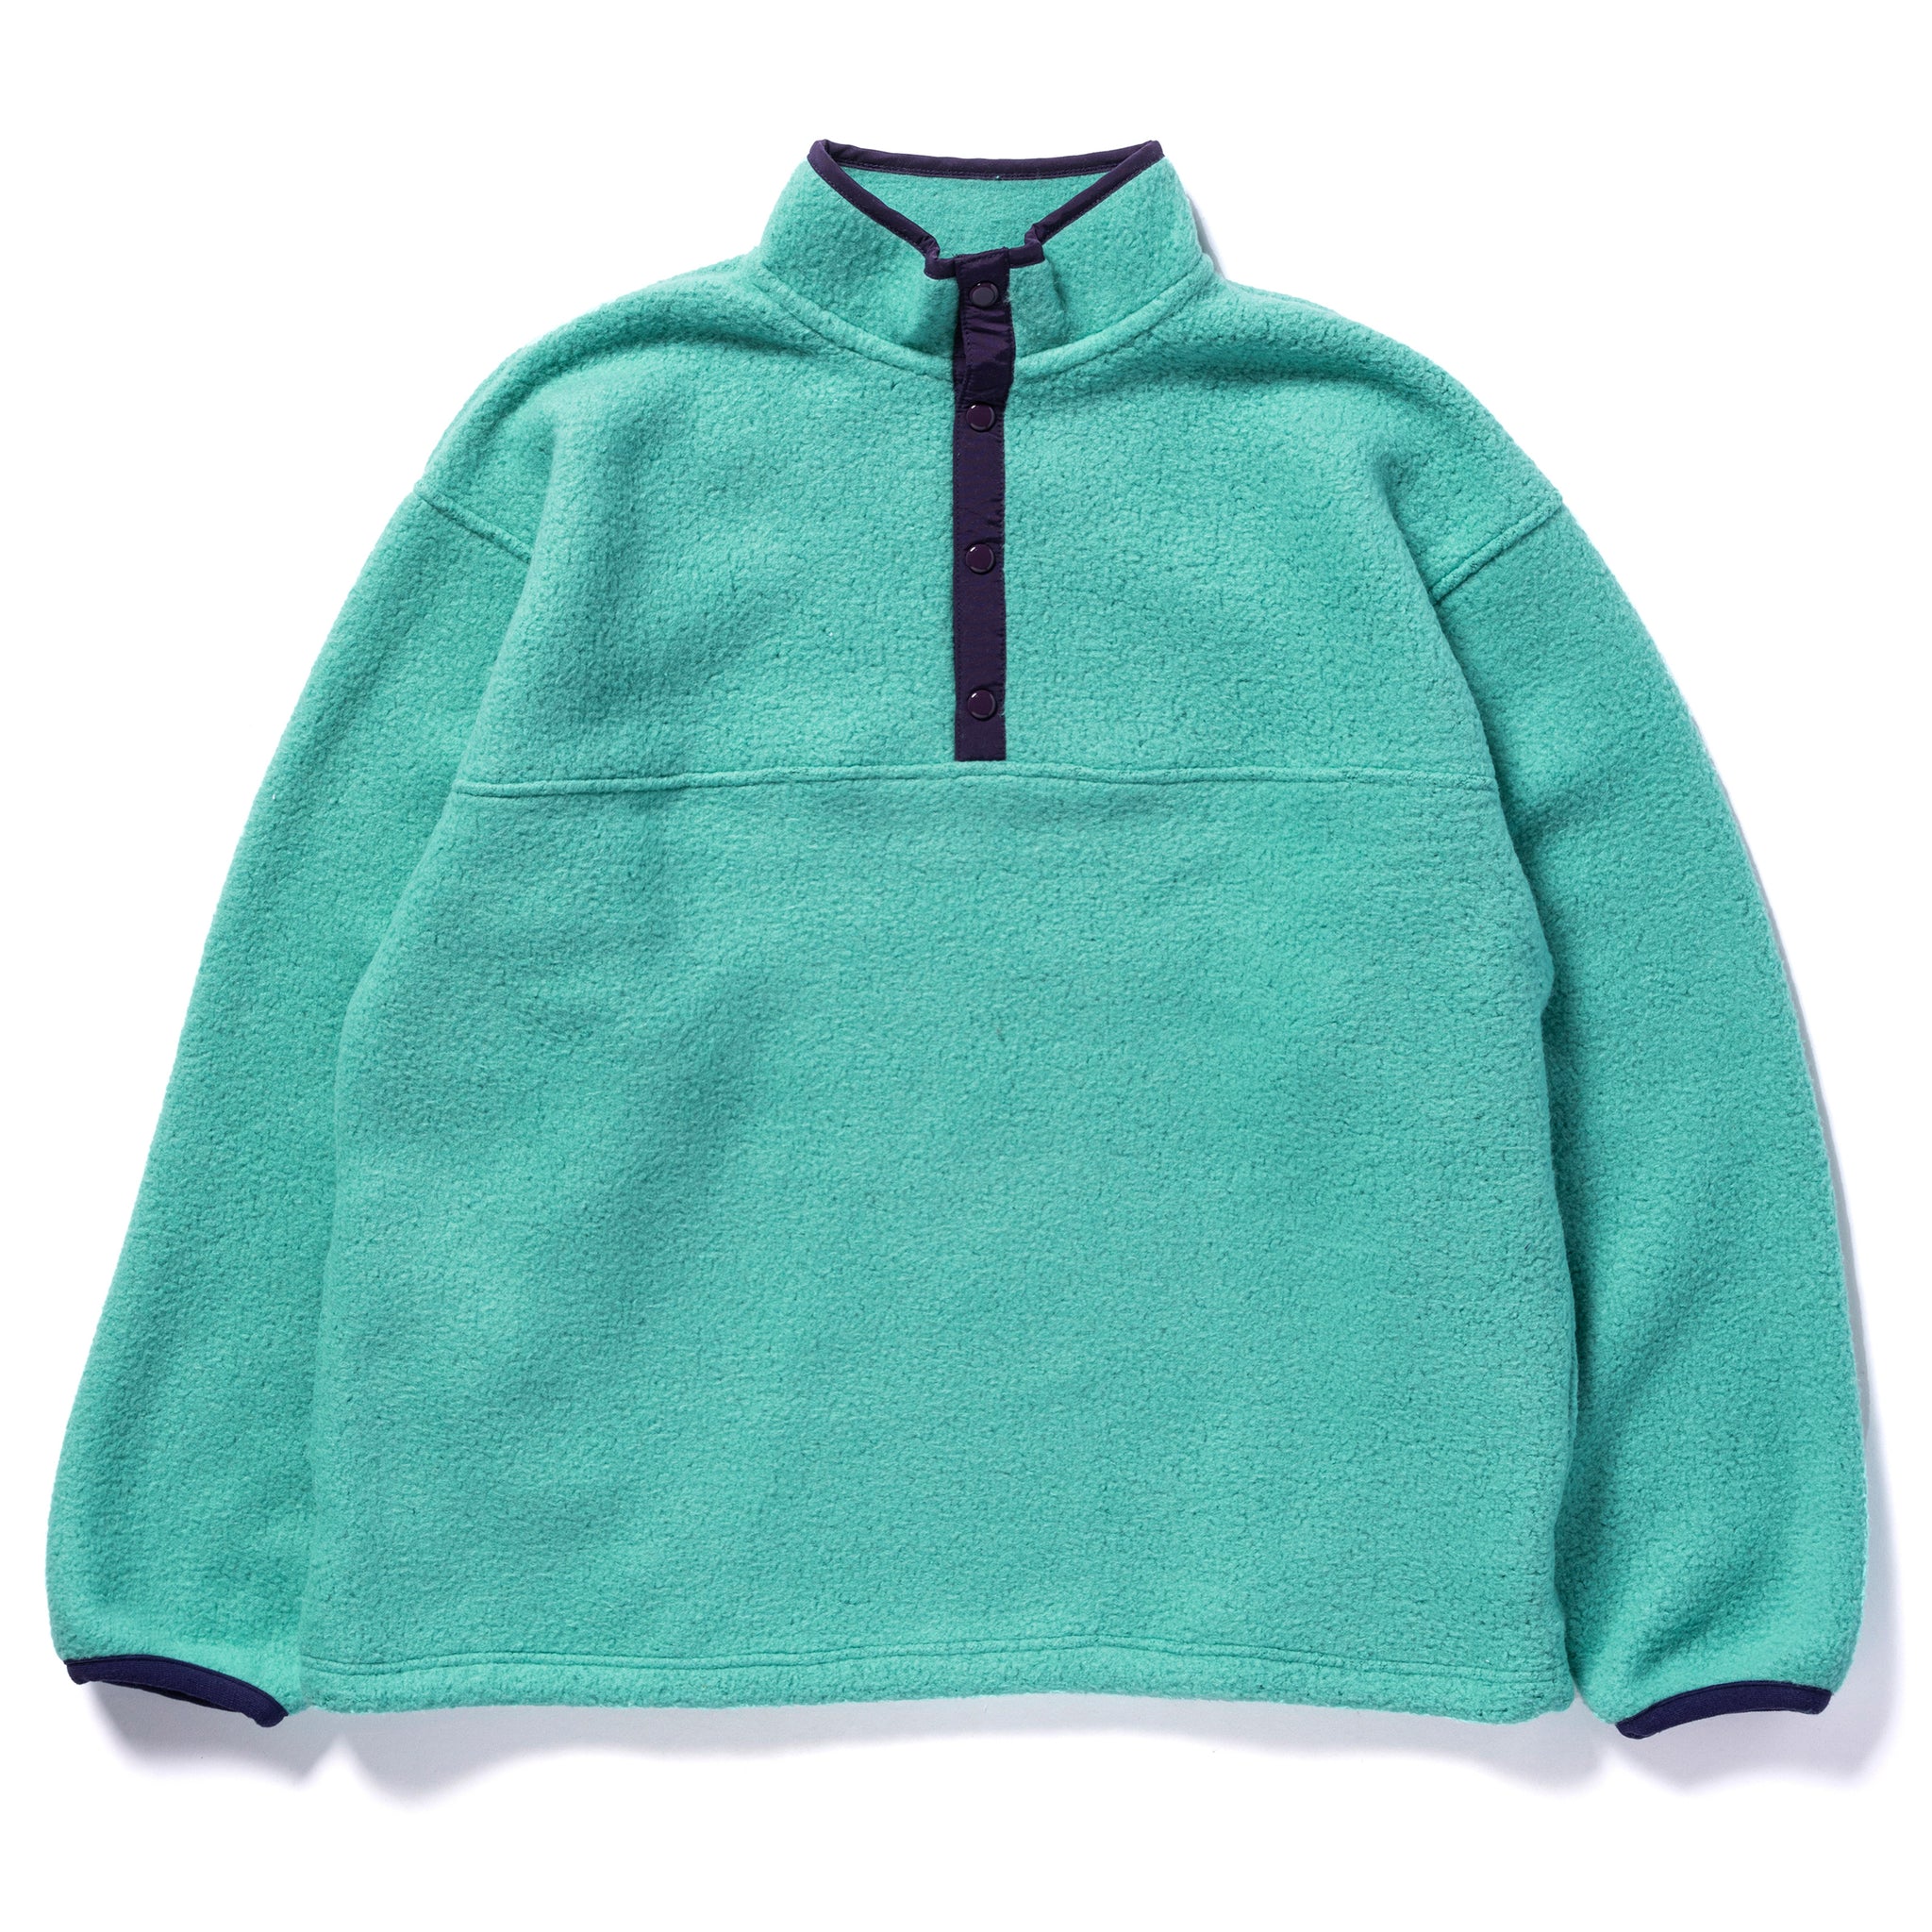 SNAP FRONT PULL-OVER FLEECE